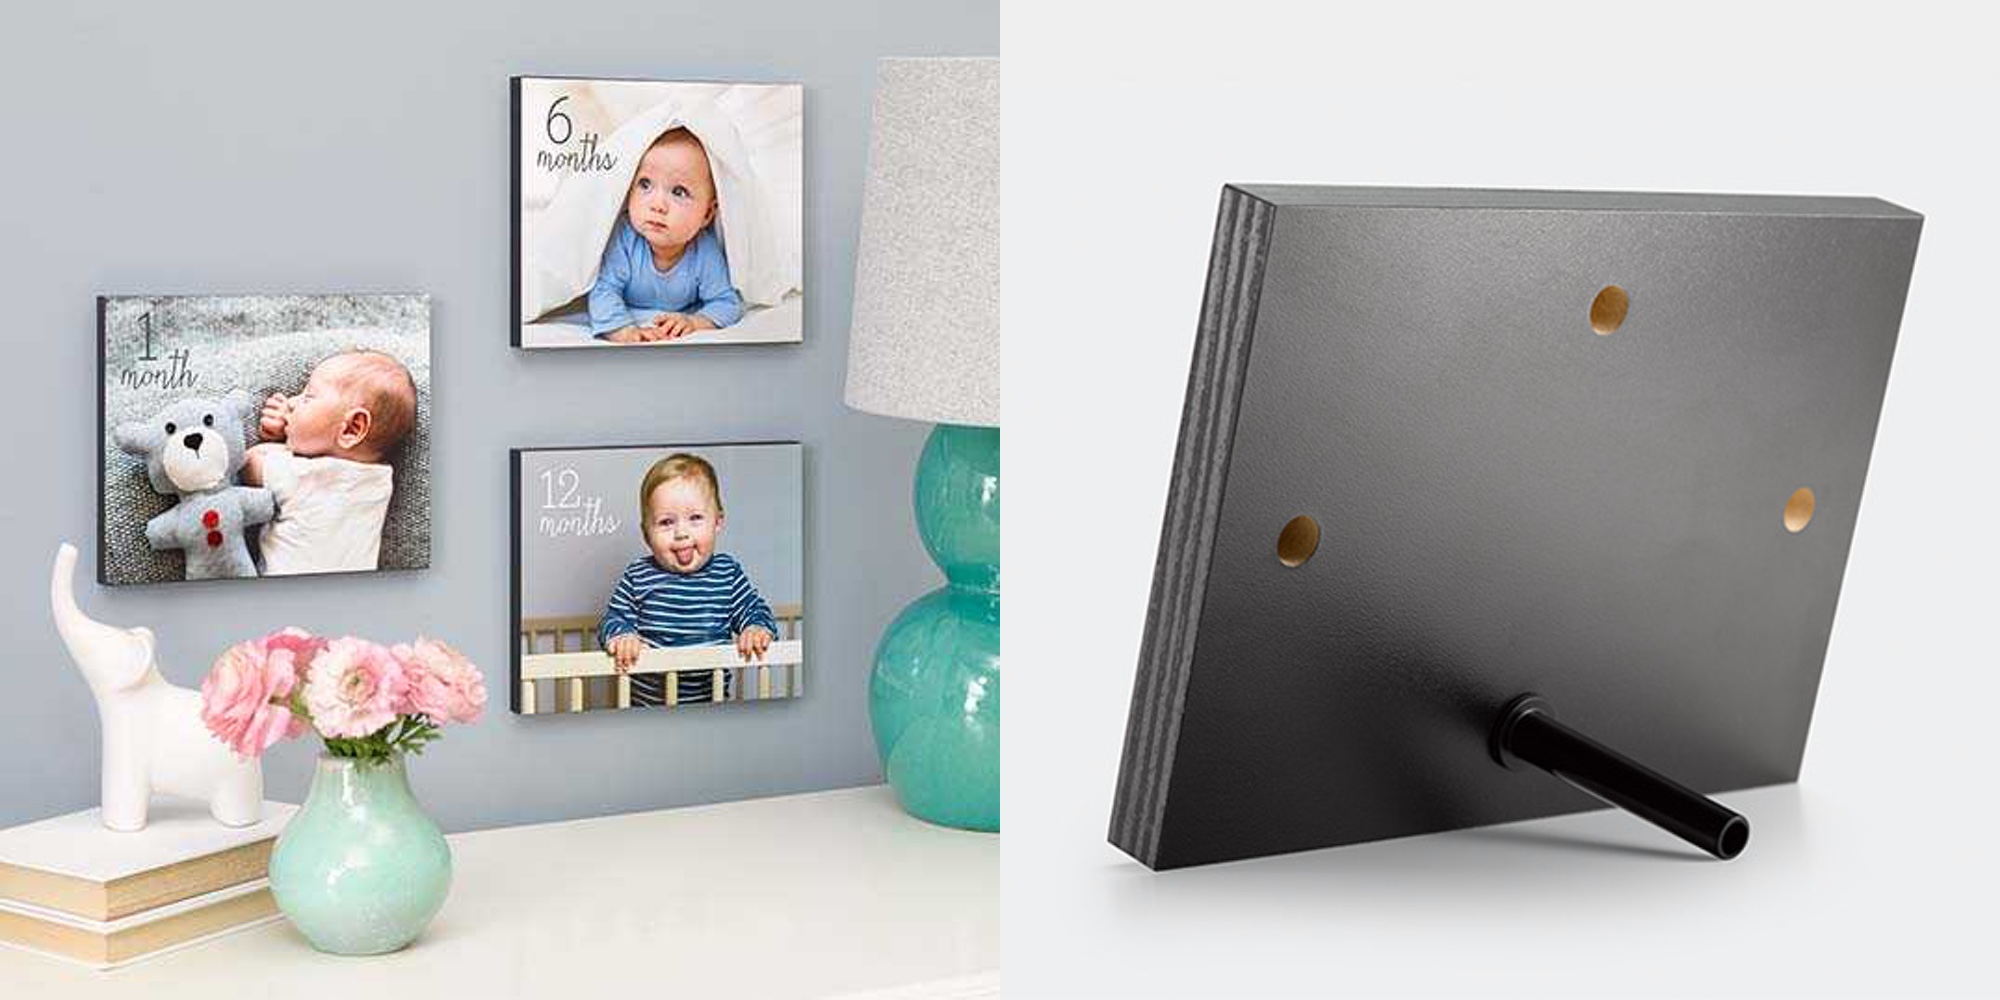 Walgreens offers decorative wood photo panels from less than $5 today